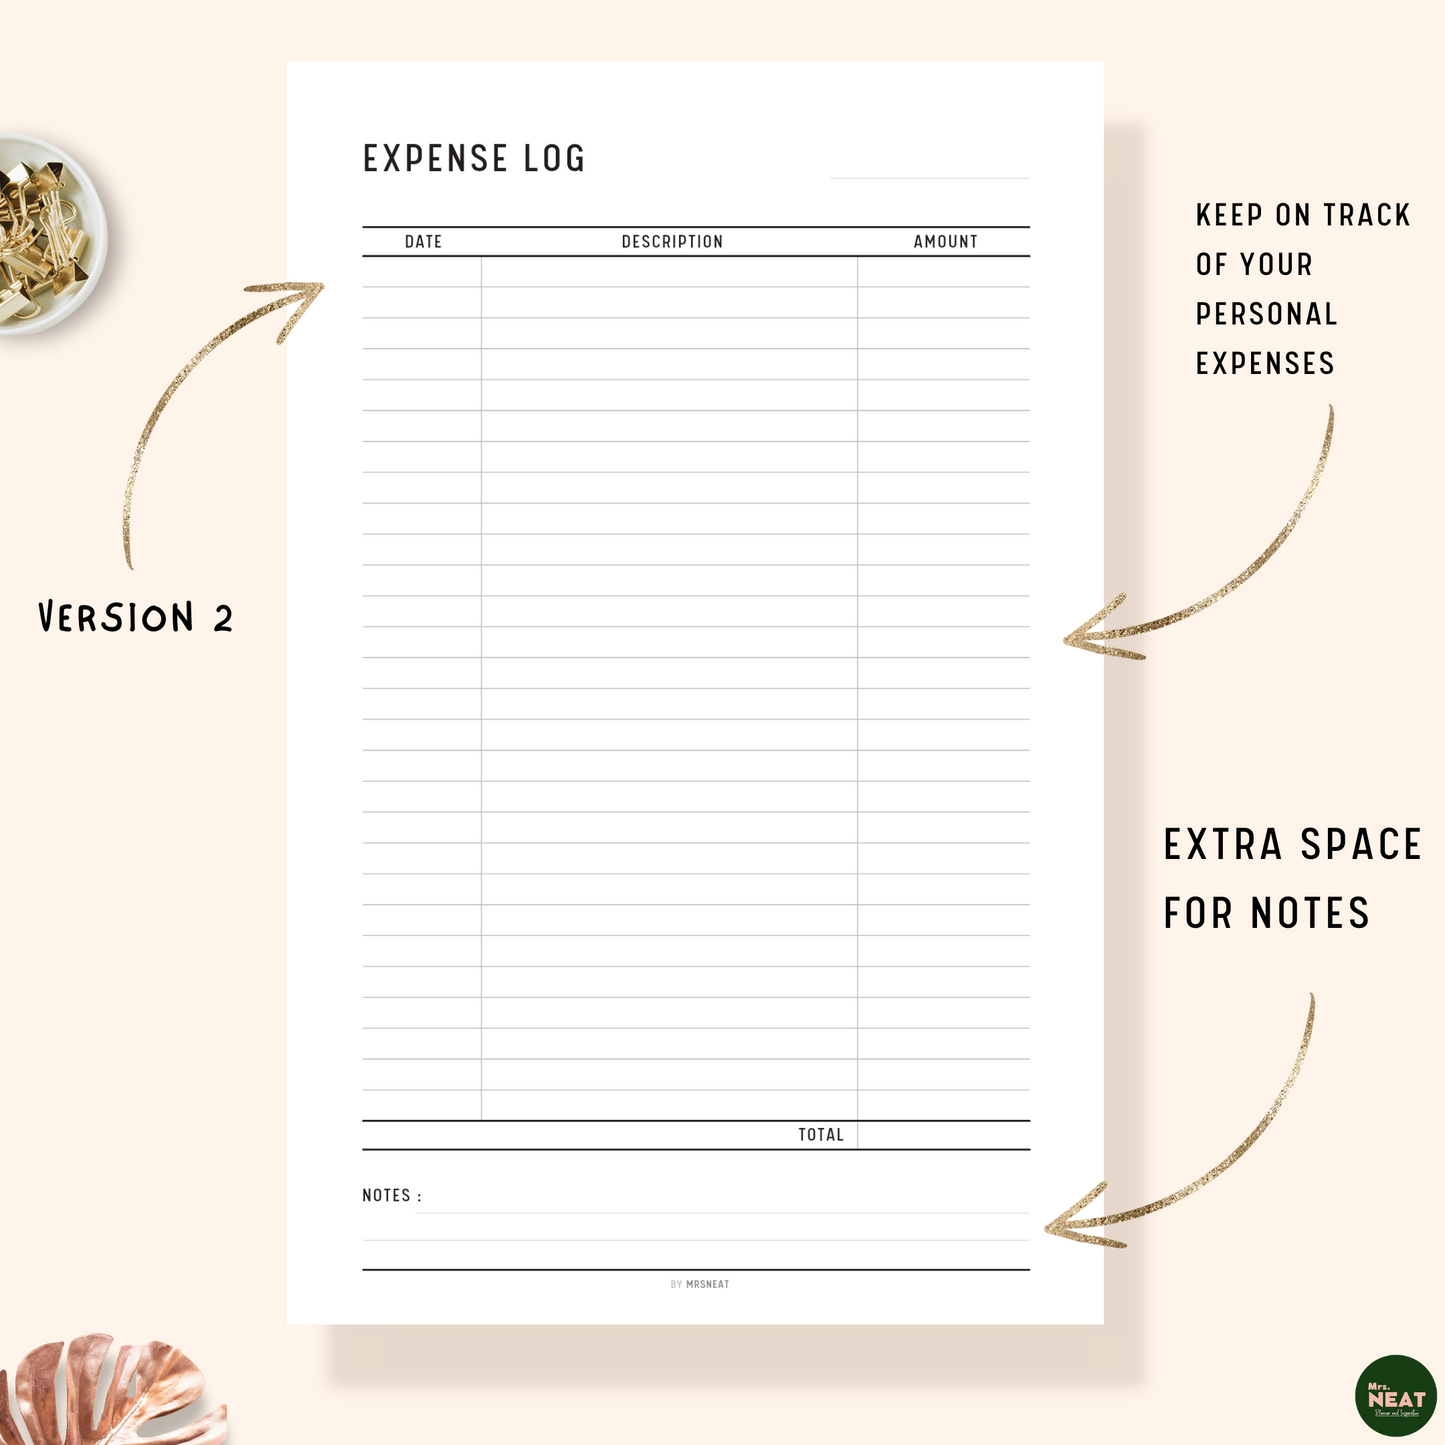 Expense Log Tracker Printable Planner with room for date, description, amount and notes